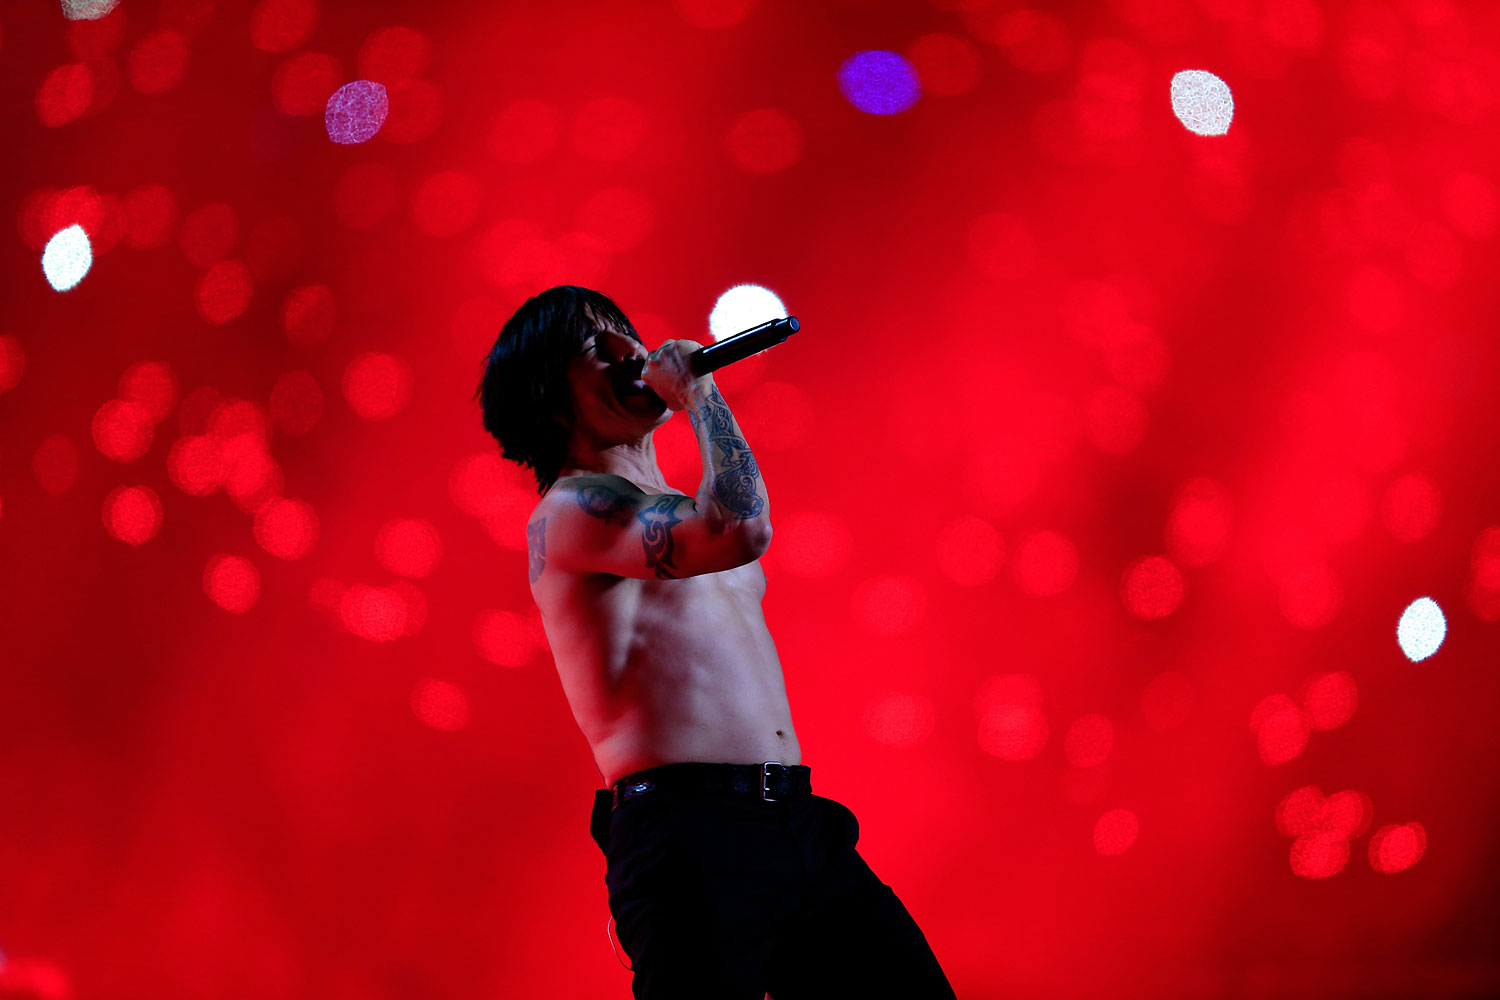 Anthony Kiedis of the Red Hot Chili Peppers performs during the Pepsi Super Bowl XLVIII Halftime Show at MetLife Stadium on February 2, 2014 in East Rutherford, New Jersey.